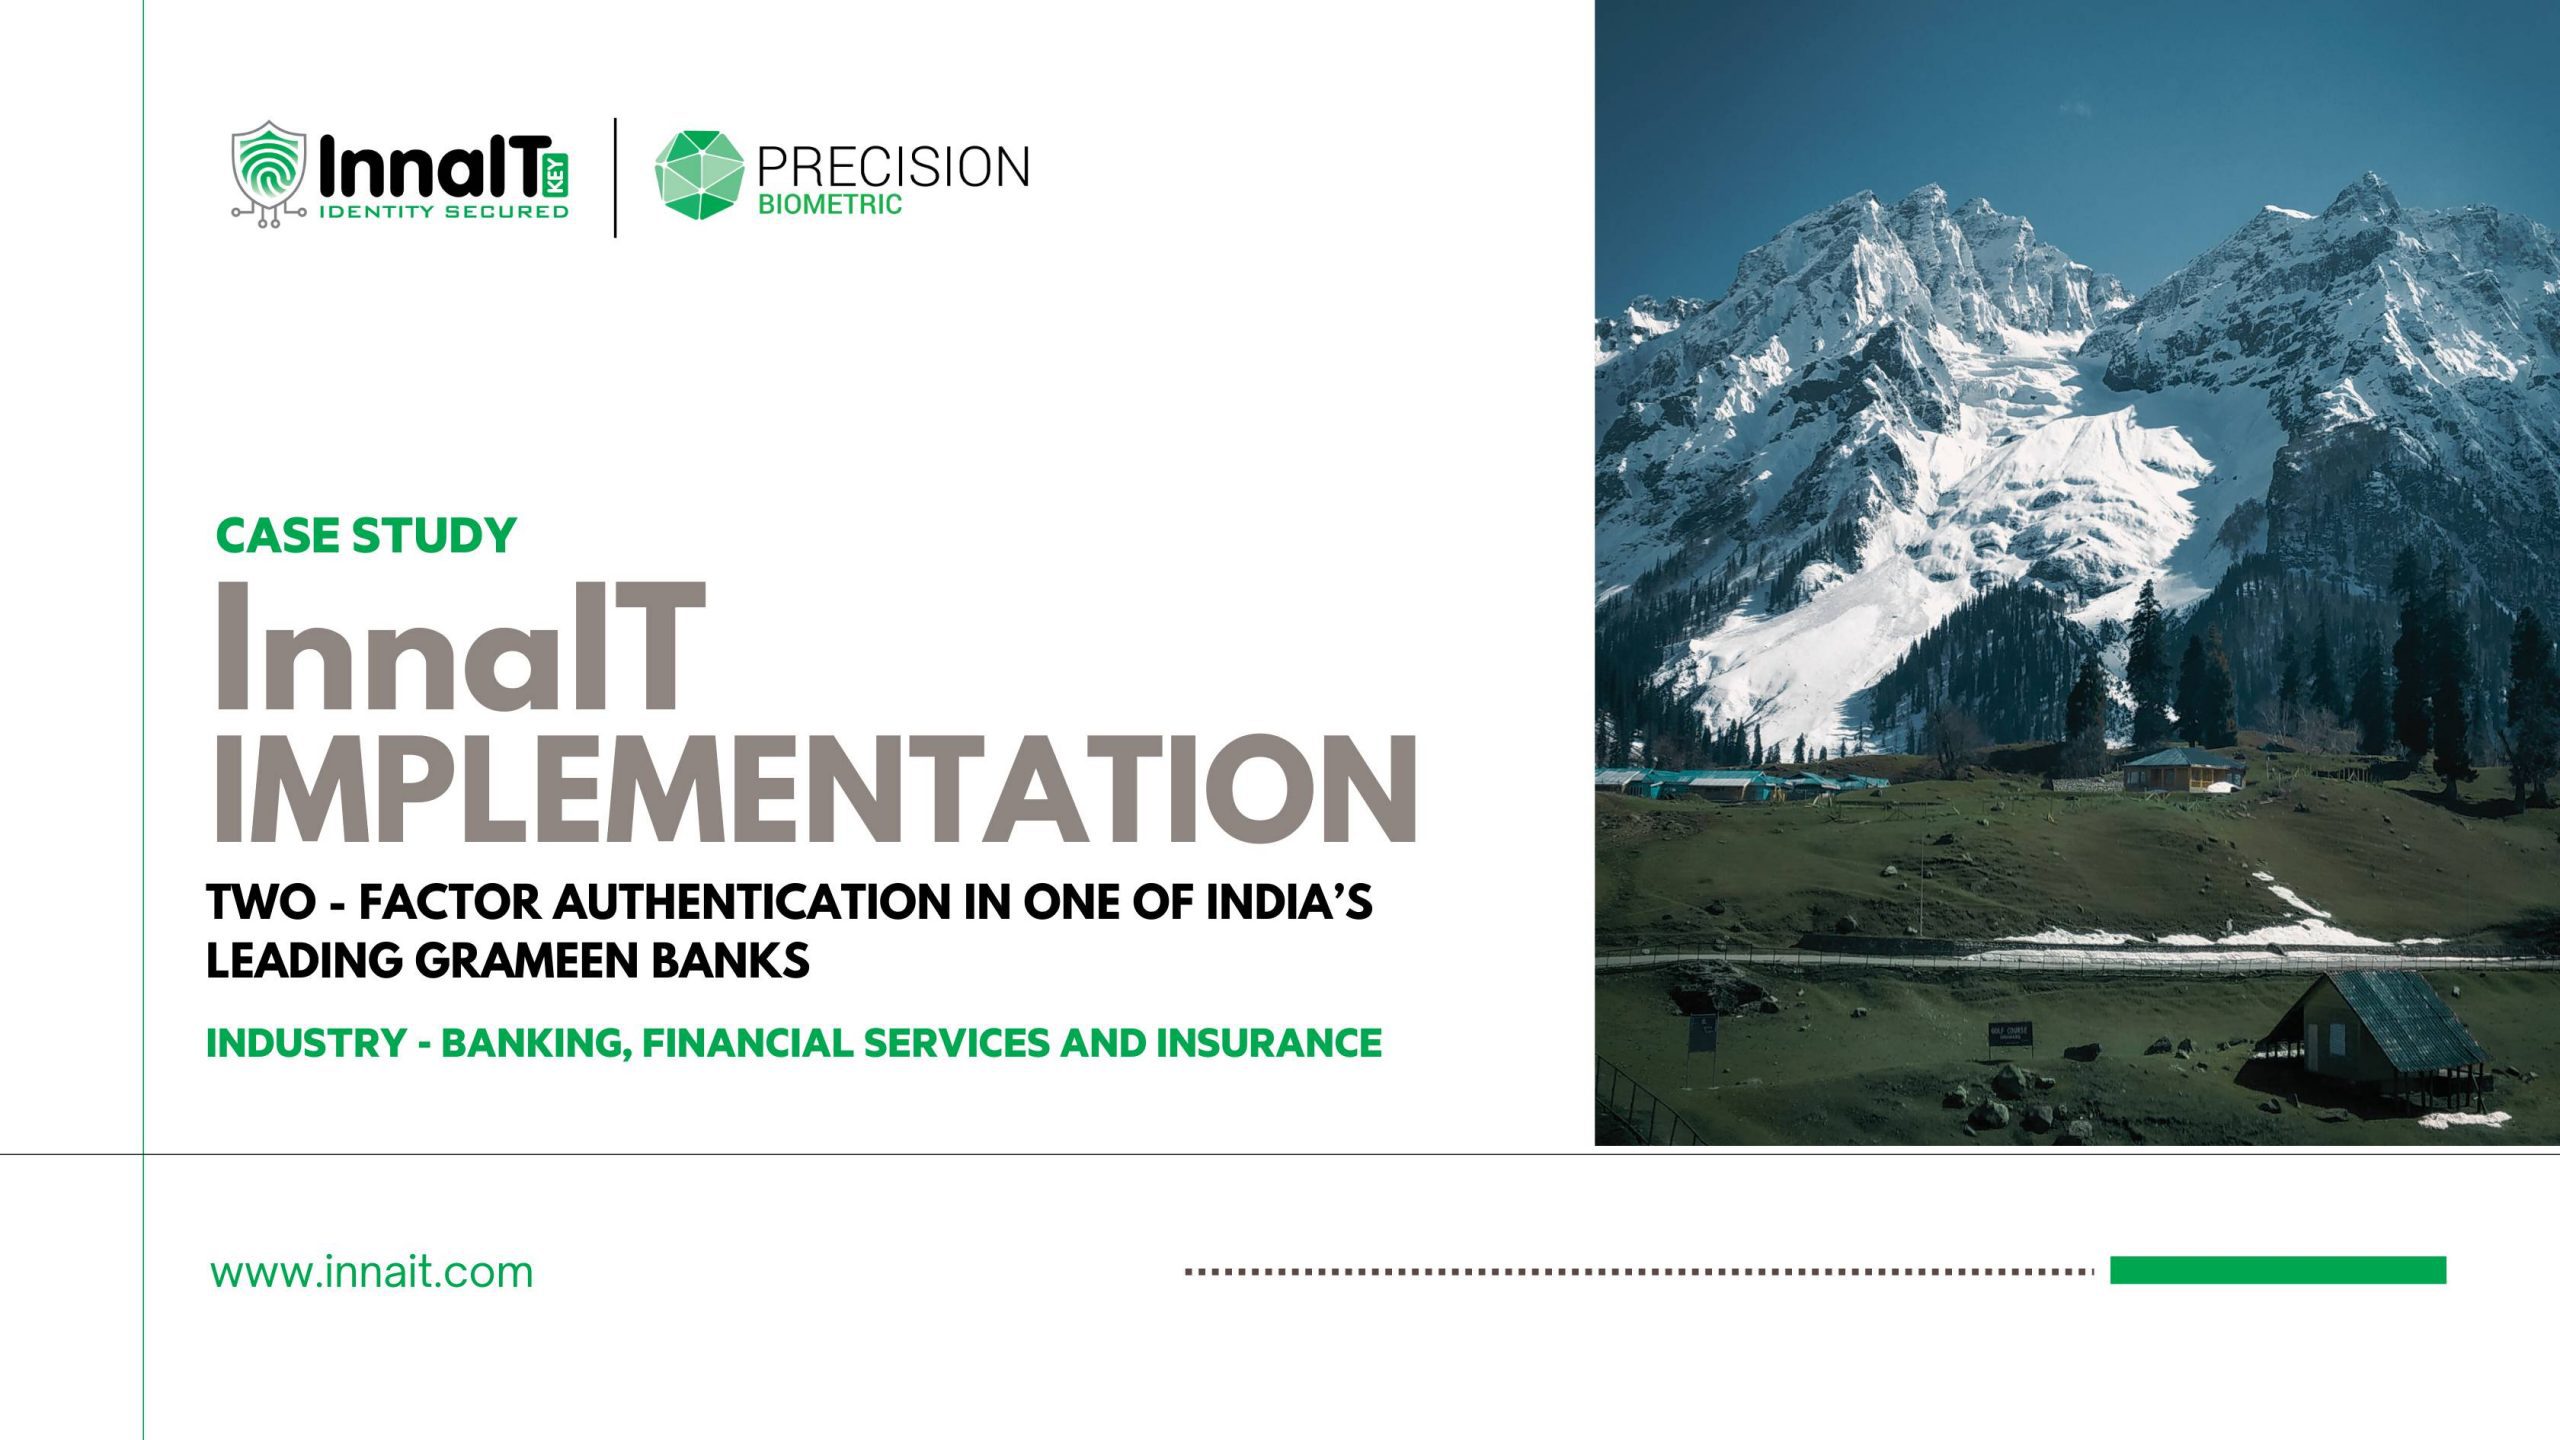 InnaIT Implementation of Two-Factor Authentication (2FA) in one of India’s leading Grameen Banks